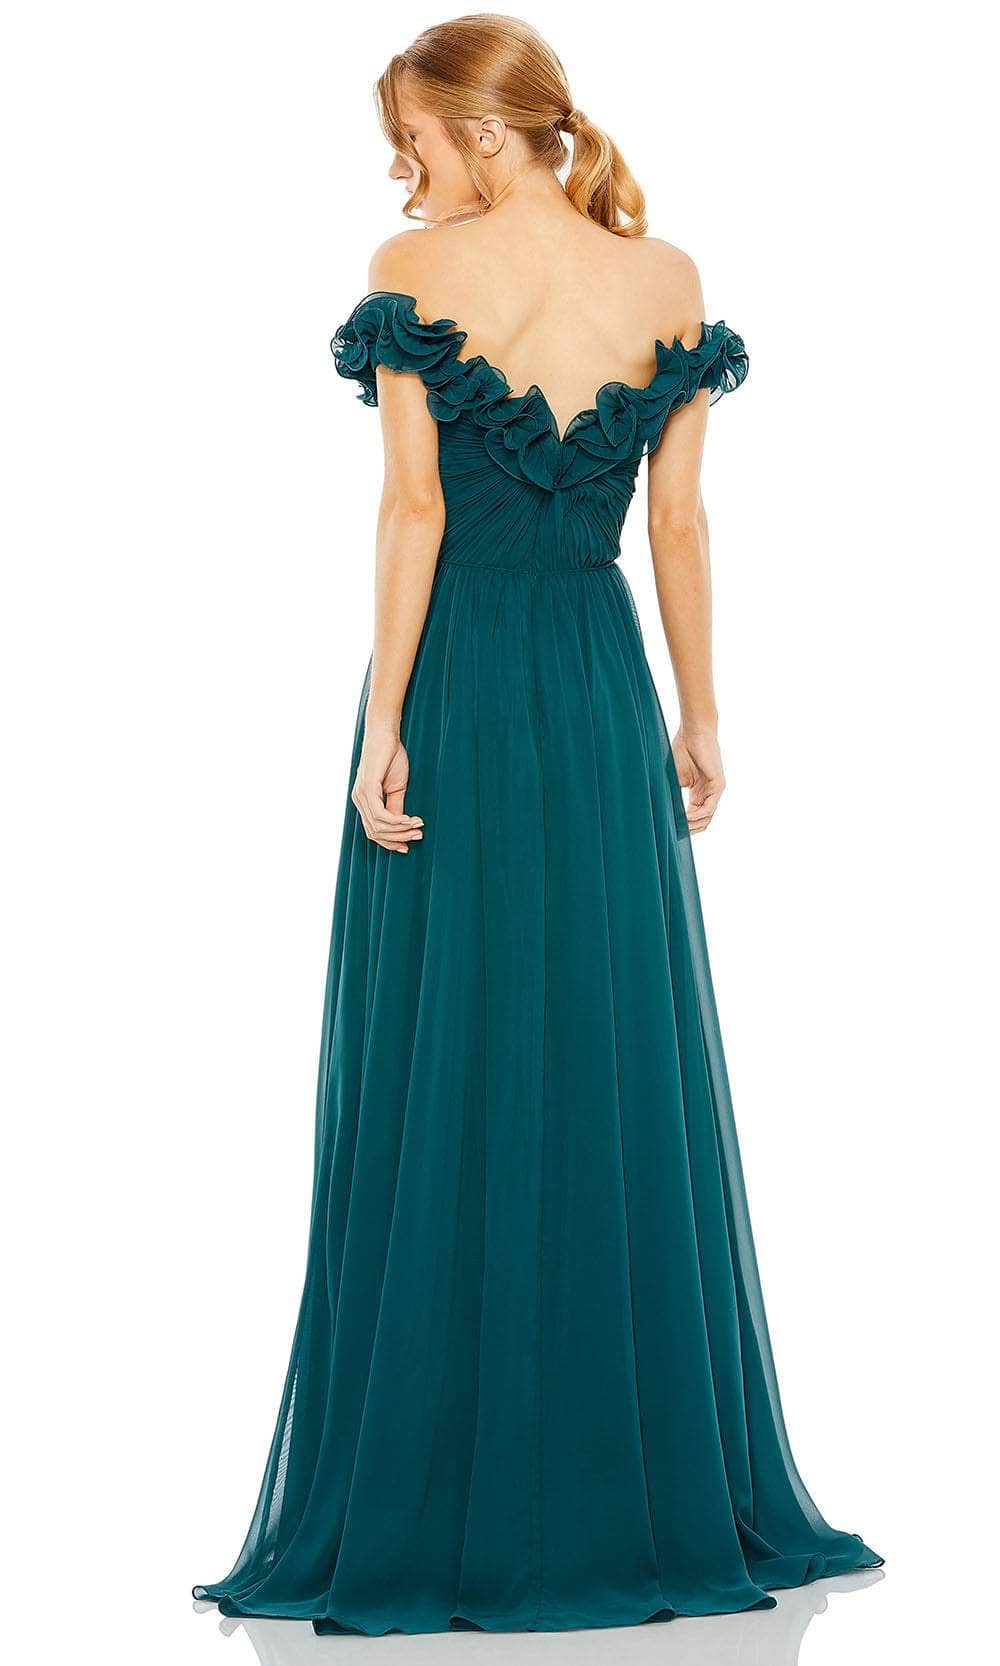 Ieena Duggal 11591 - Ruched A-Line Evening Gown Evening Dresses